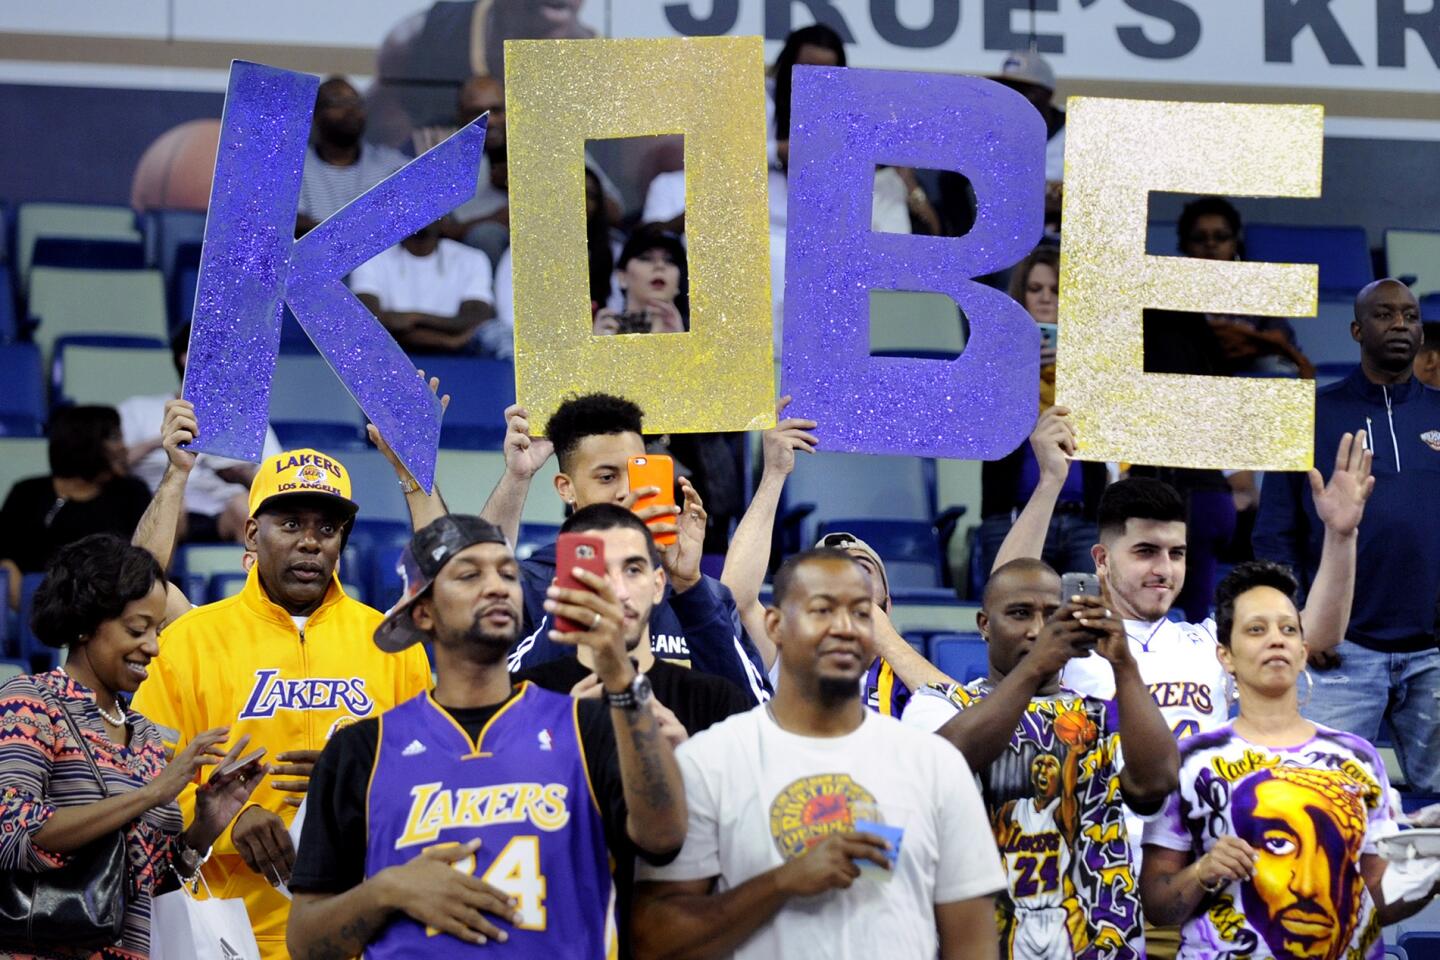 Fans hold a 'KOBE' sign as the Lakers take the court at Smoothie King Center in New Orleans.